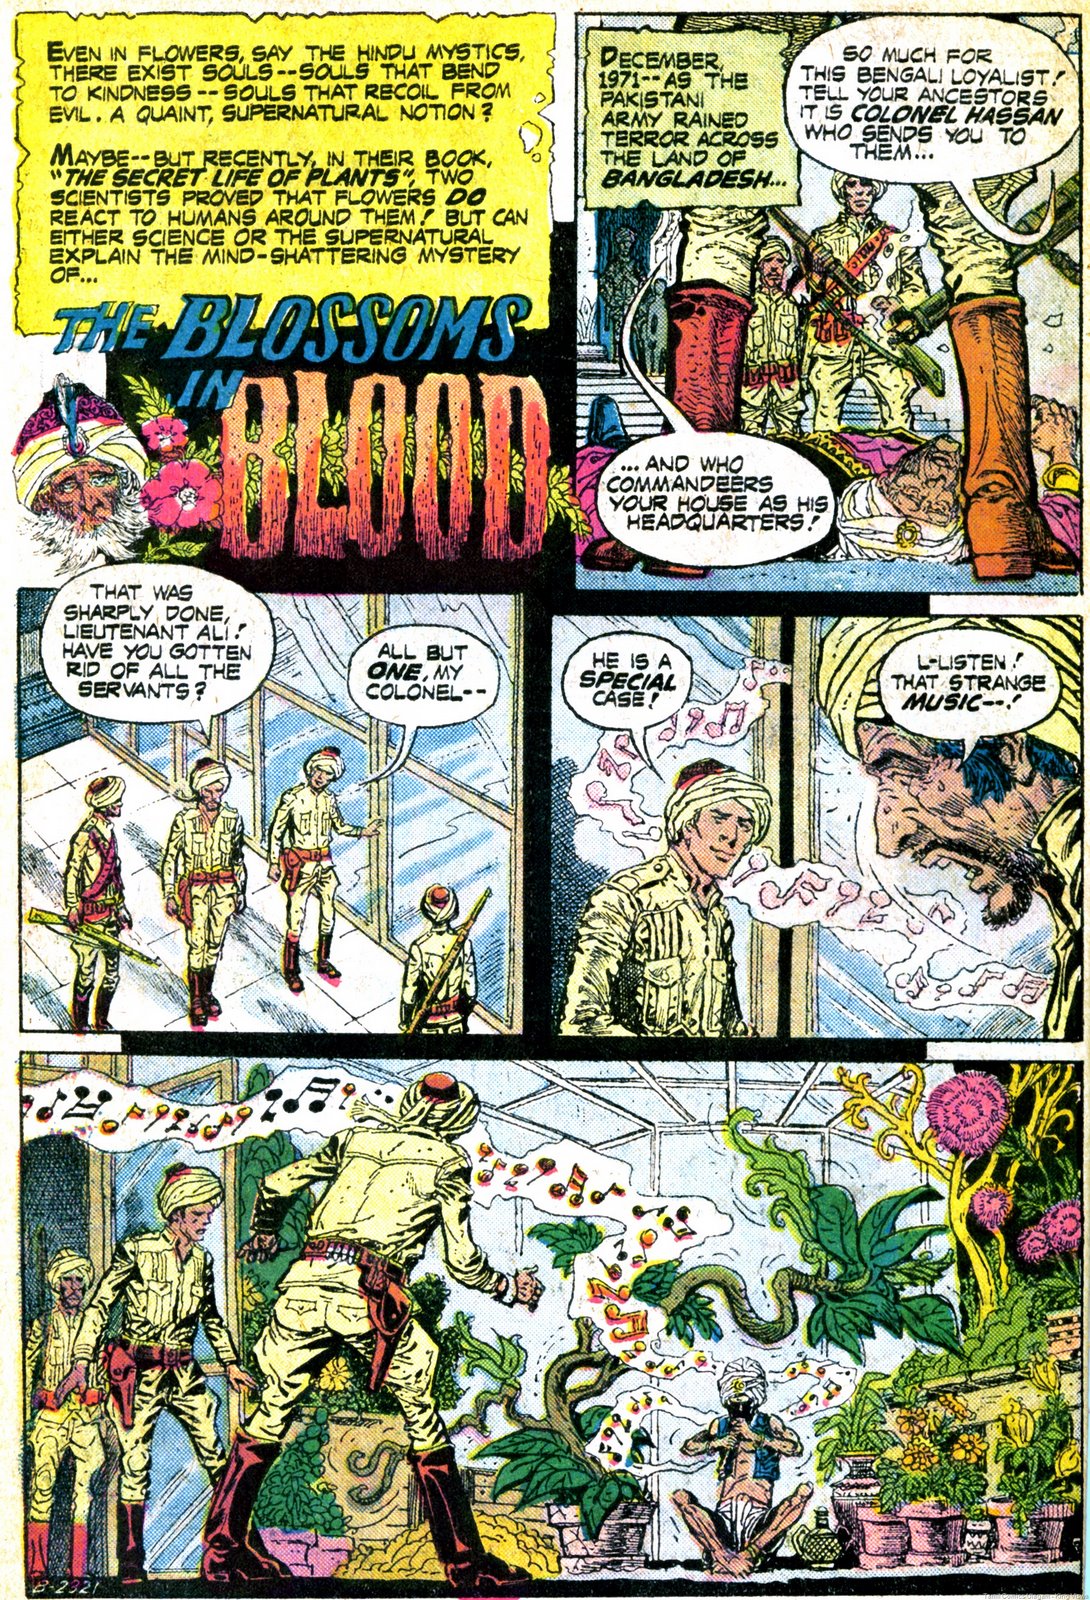 [DC Ghosts Issue No 39 June 1975 The Blossoms of Blood Page 1[5].jpg]